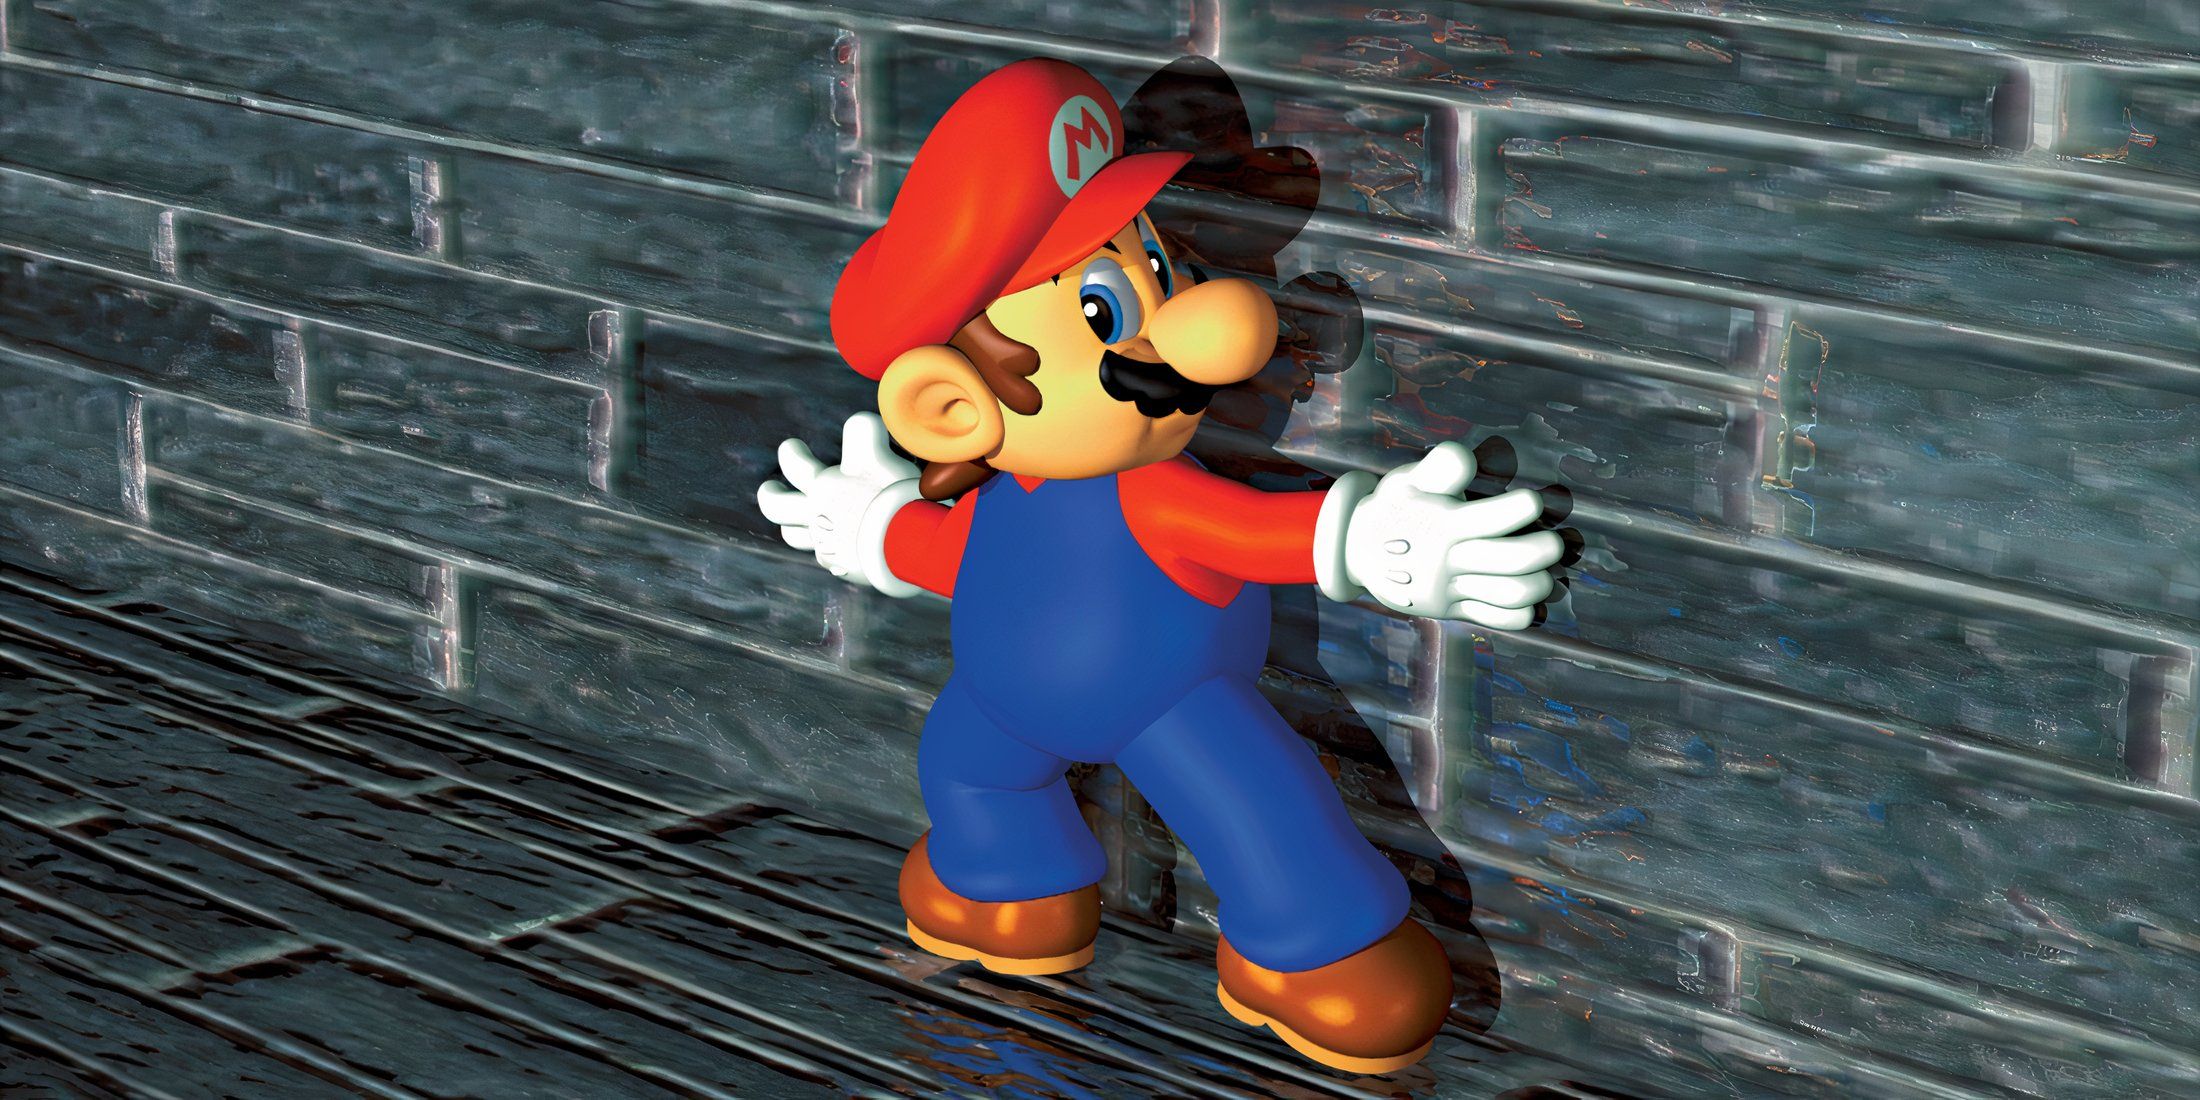 mario pushing against a wall in super mario 64.